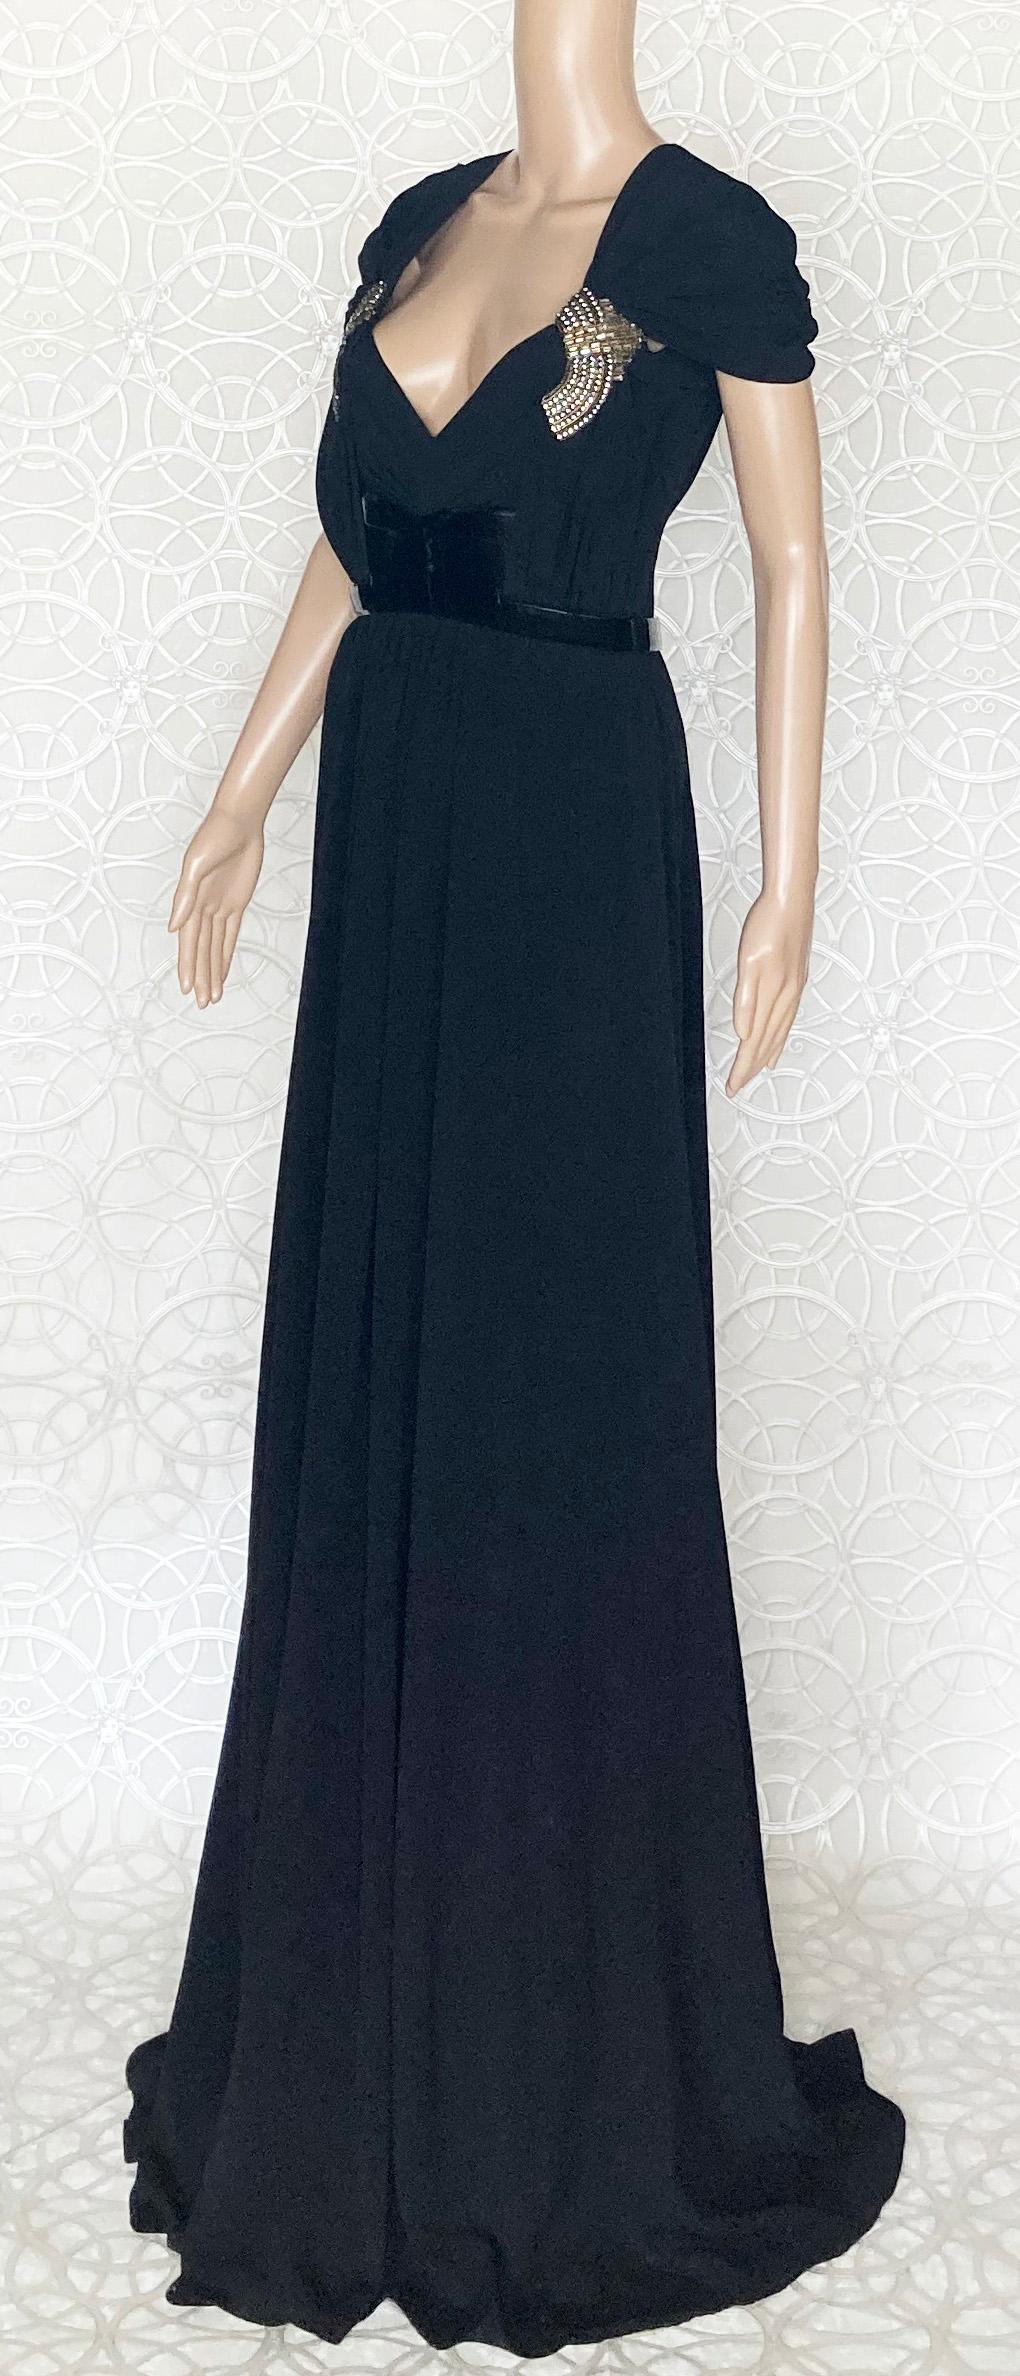 BRAND NEW GUCCI LONG DRESS 

If you're looking for that incredible dress that Ciara and other stars wore on the red carpet then you are in luck....HERE'S is the same GUCCI dress!
 
Content: 55% acetate, 45% silk
Discreet back zipper
Embroidery with